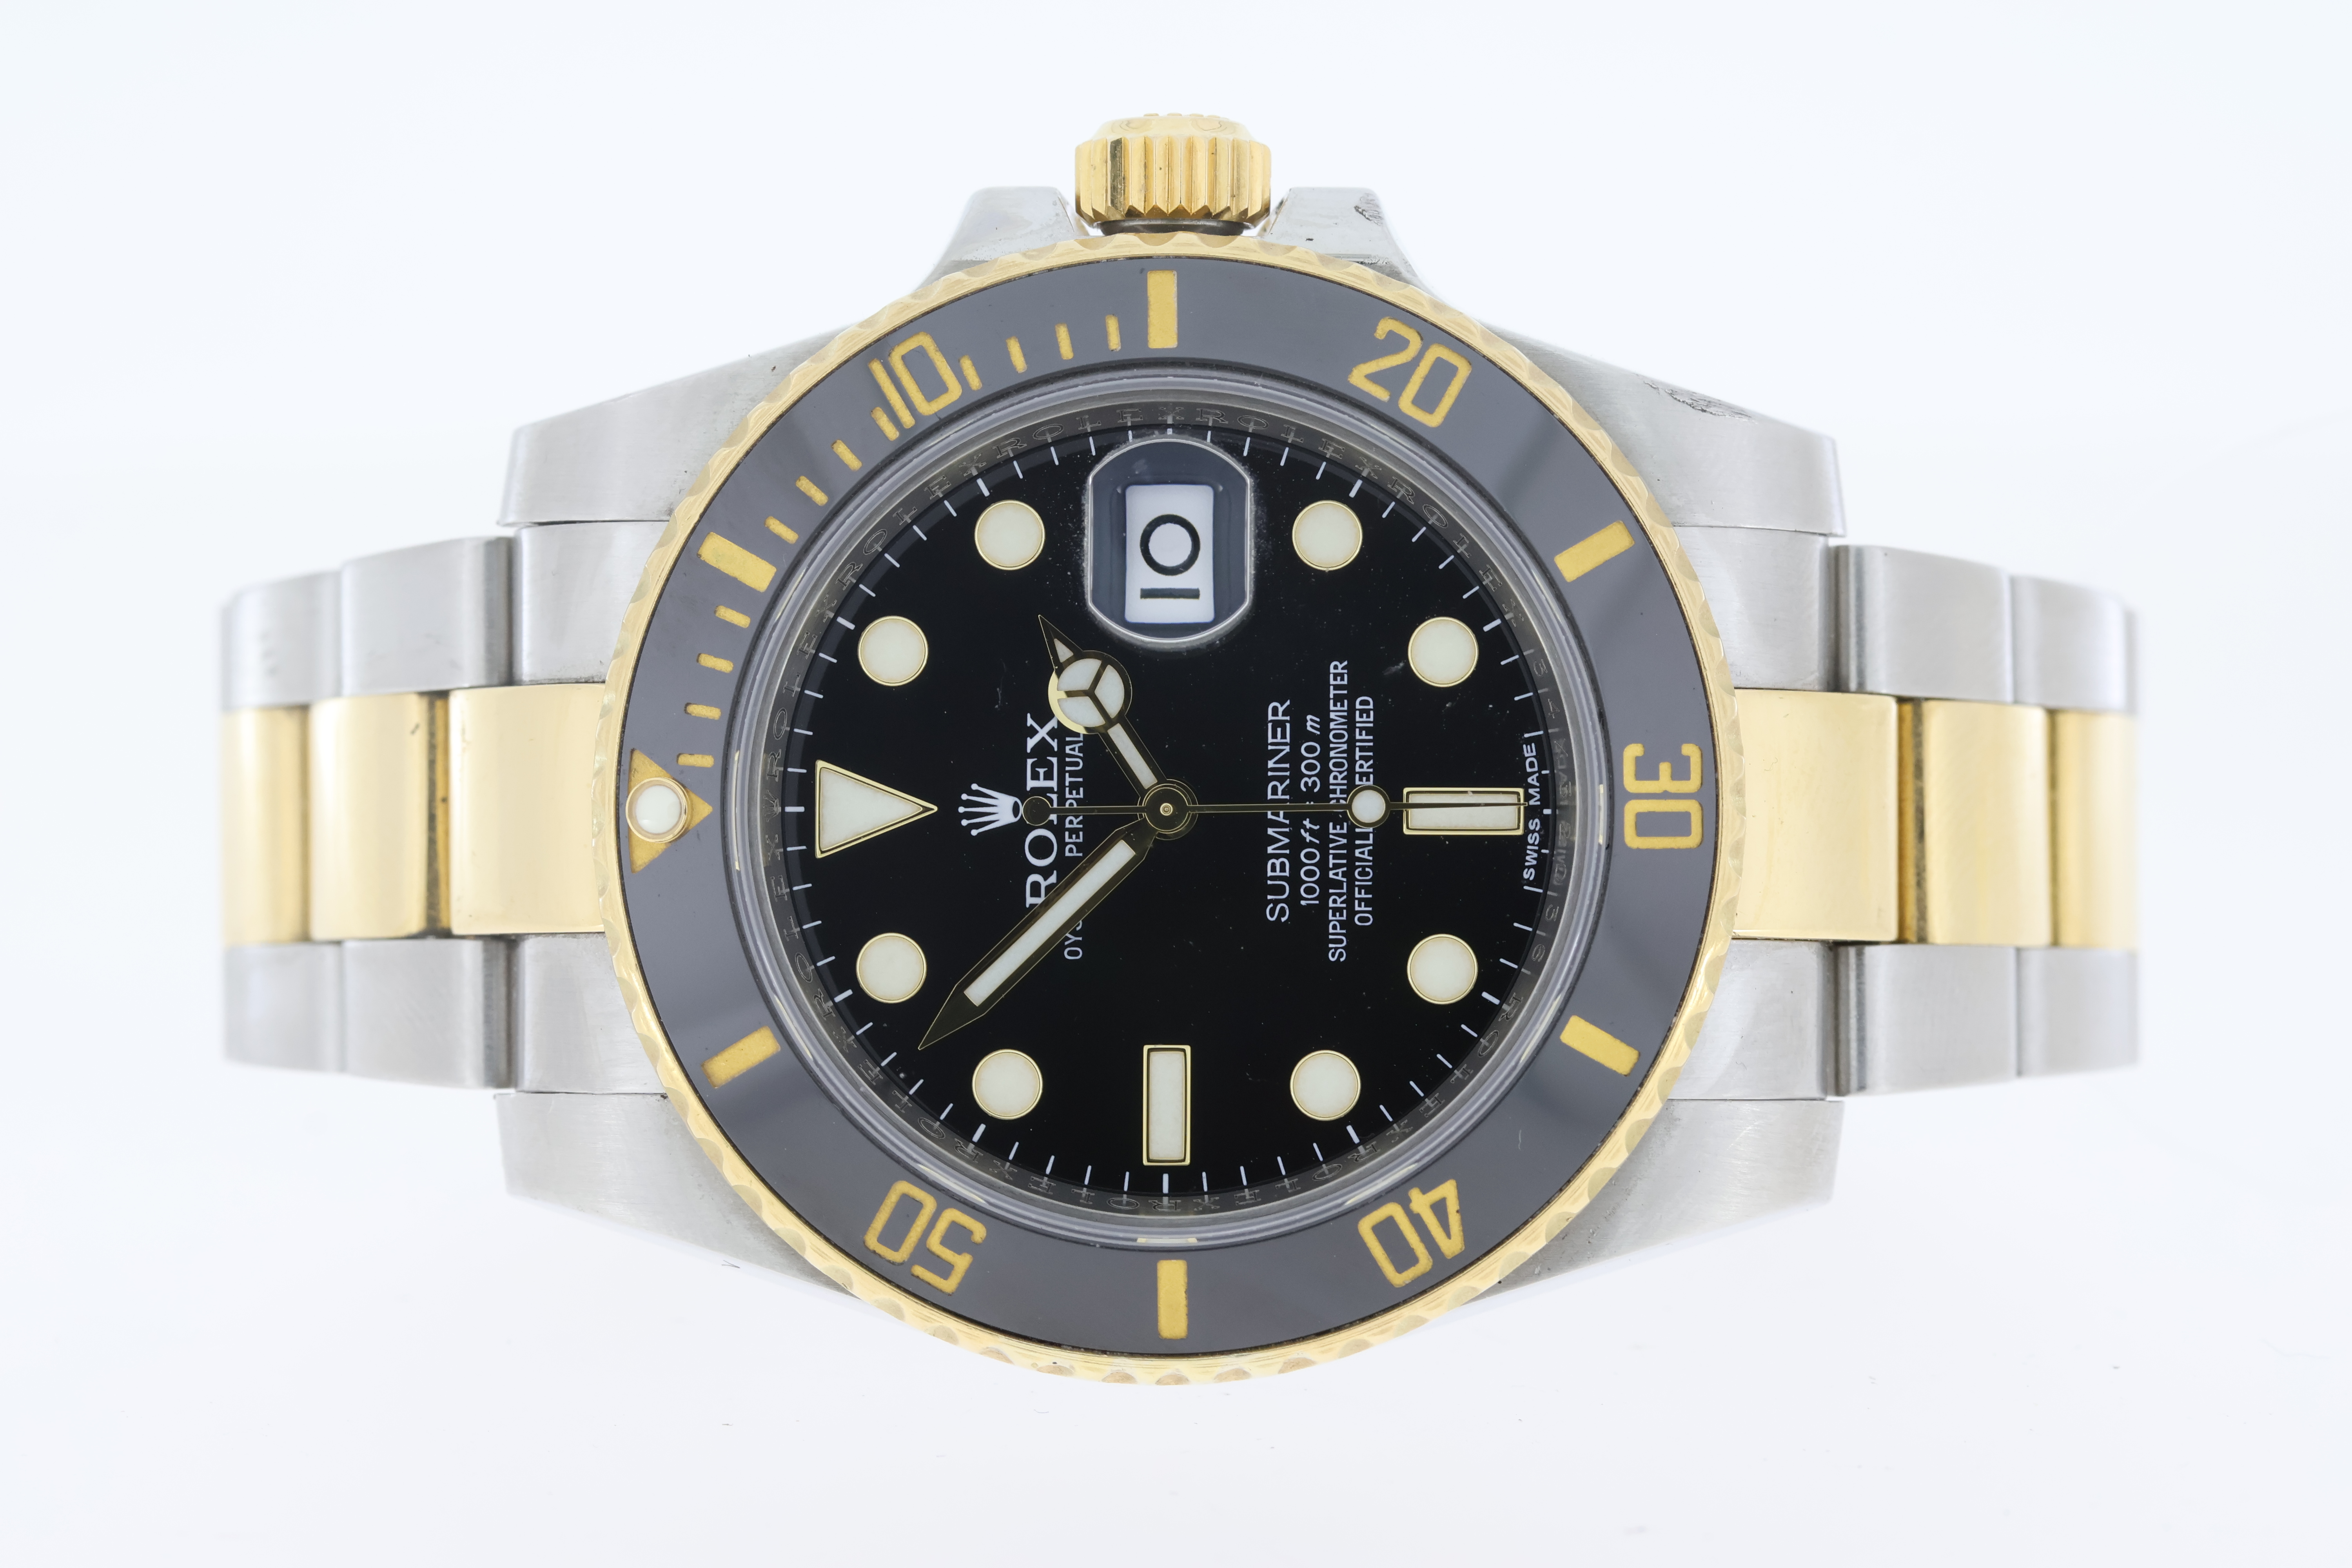 Rolex Submariner Date Reference 116613LN Steel and Gold - Image 2 of 8